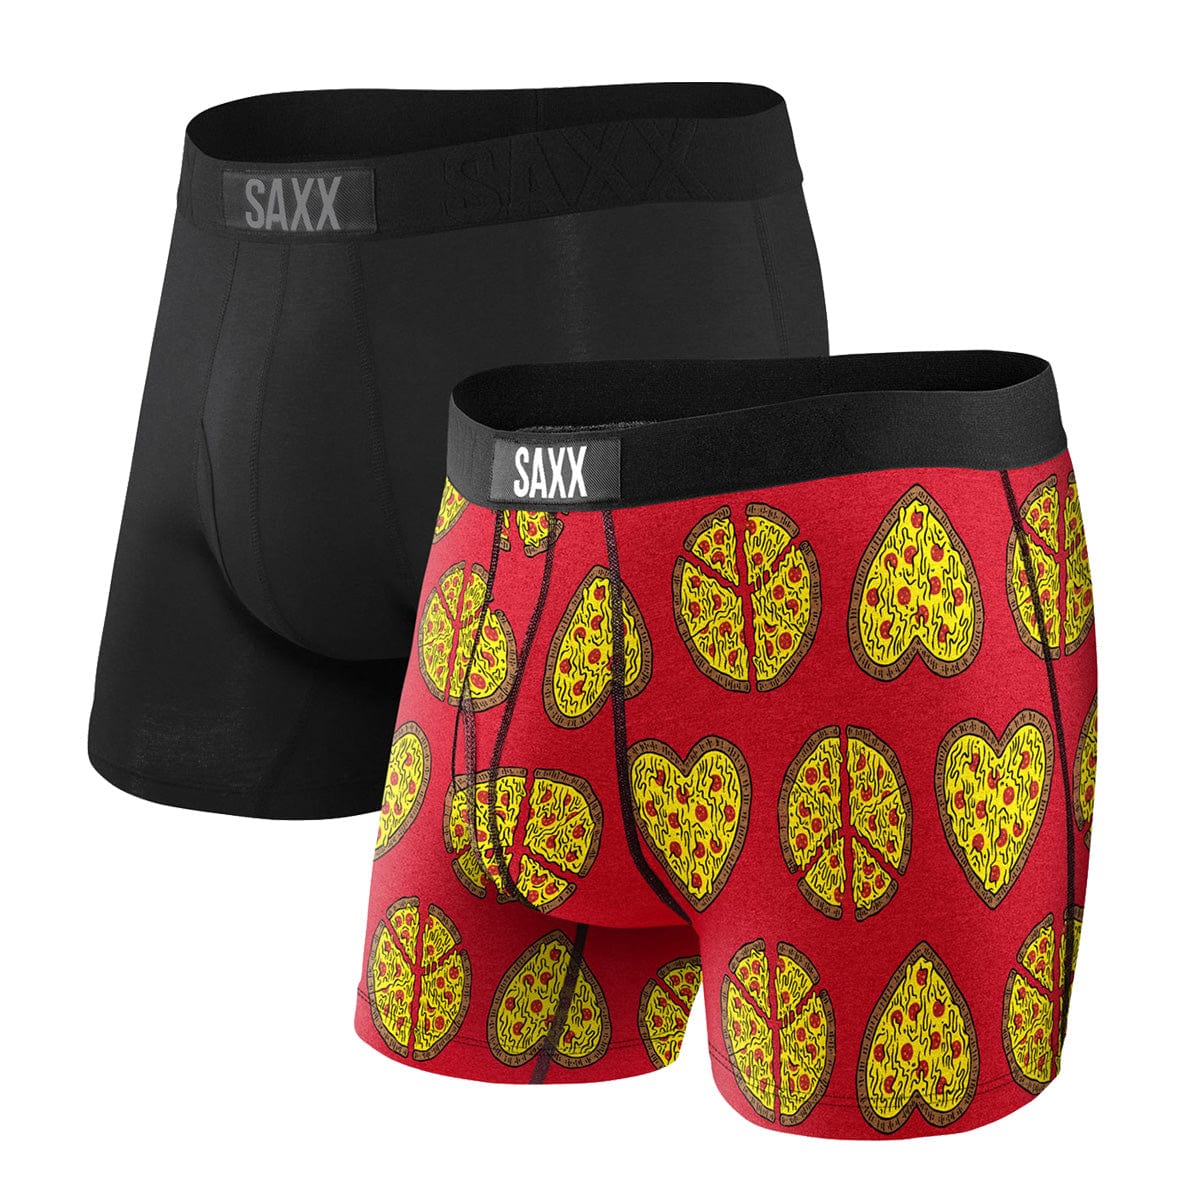 Saxx Vibe Boxers - Piece & Love / Black (2 Pack) - The Hockey Shop Source For Sports